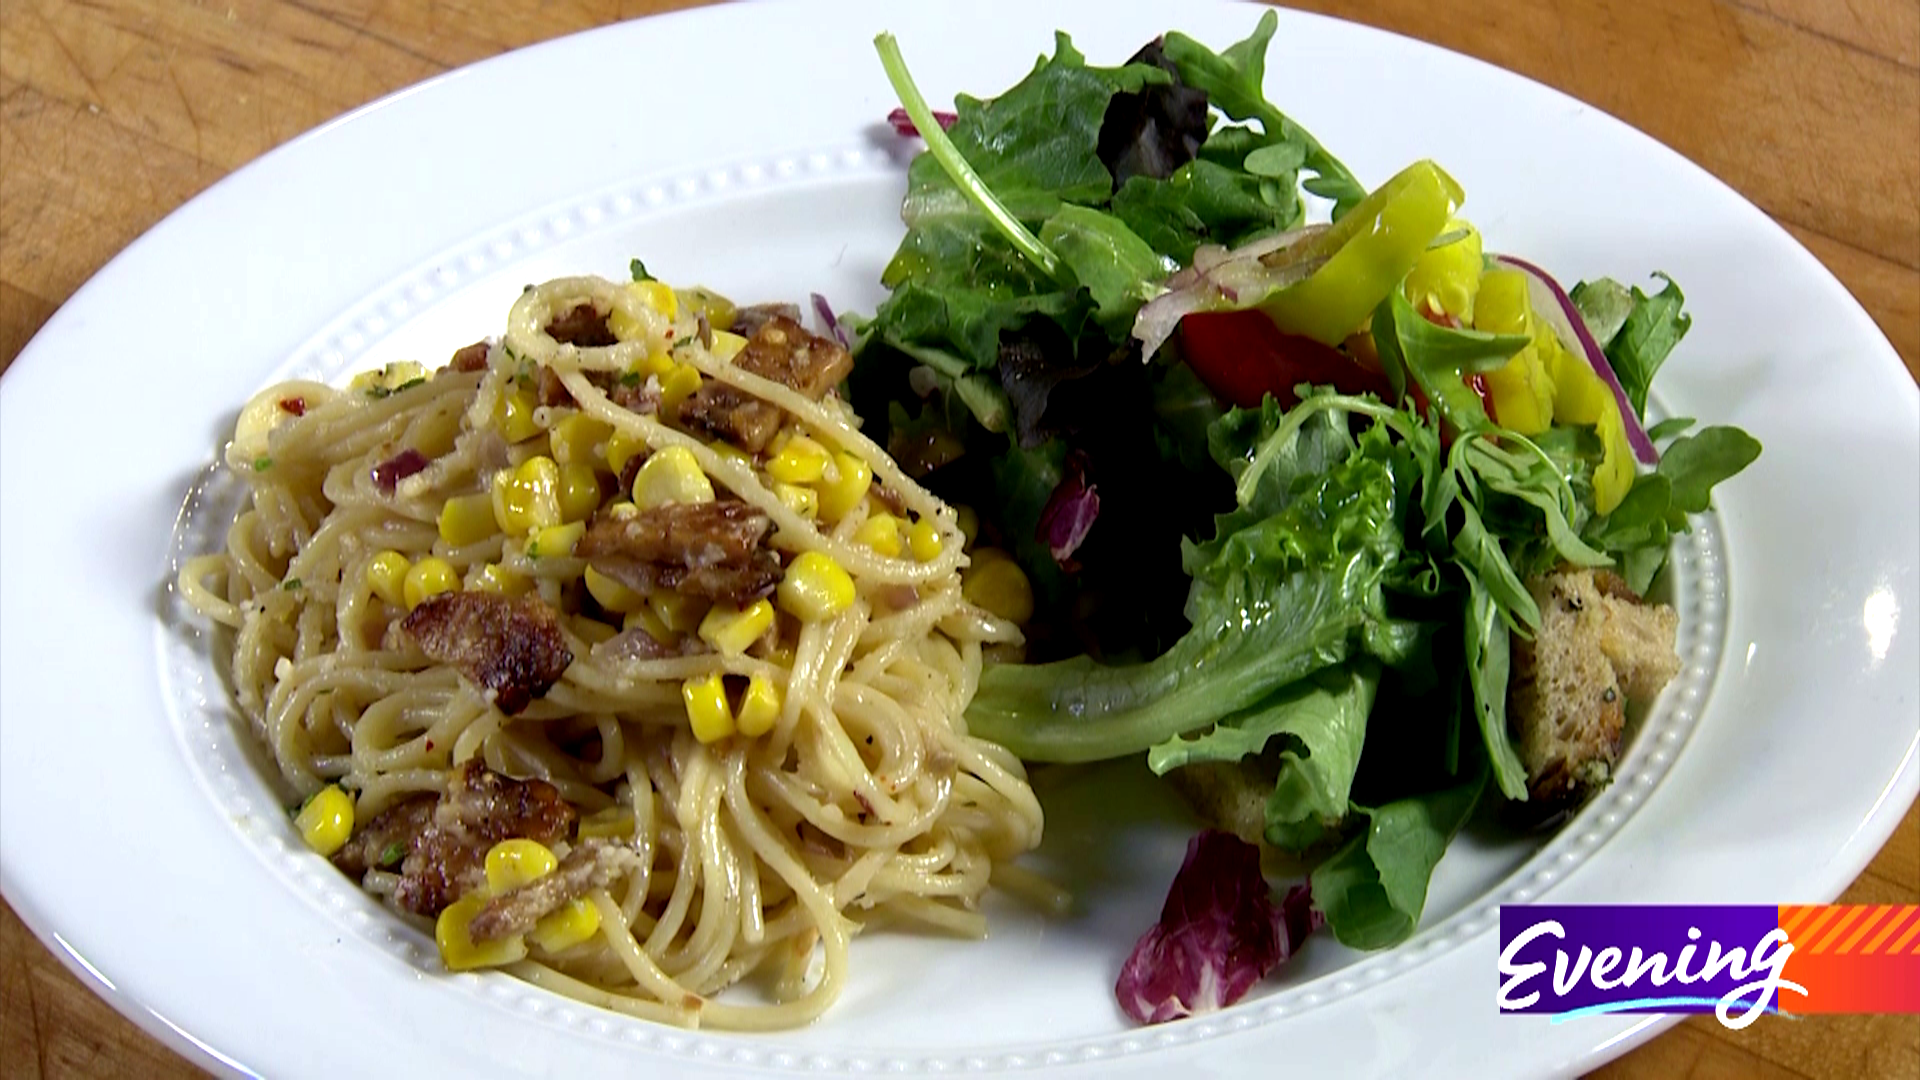 An Italian favorite gets a plant-based makeover from plant-based Chef-extraordinaire, Makini Howell. #k5evening